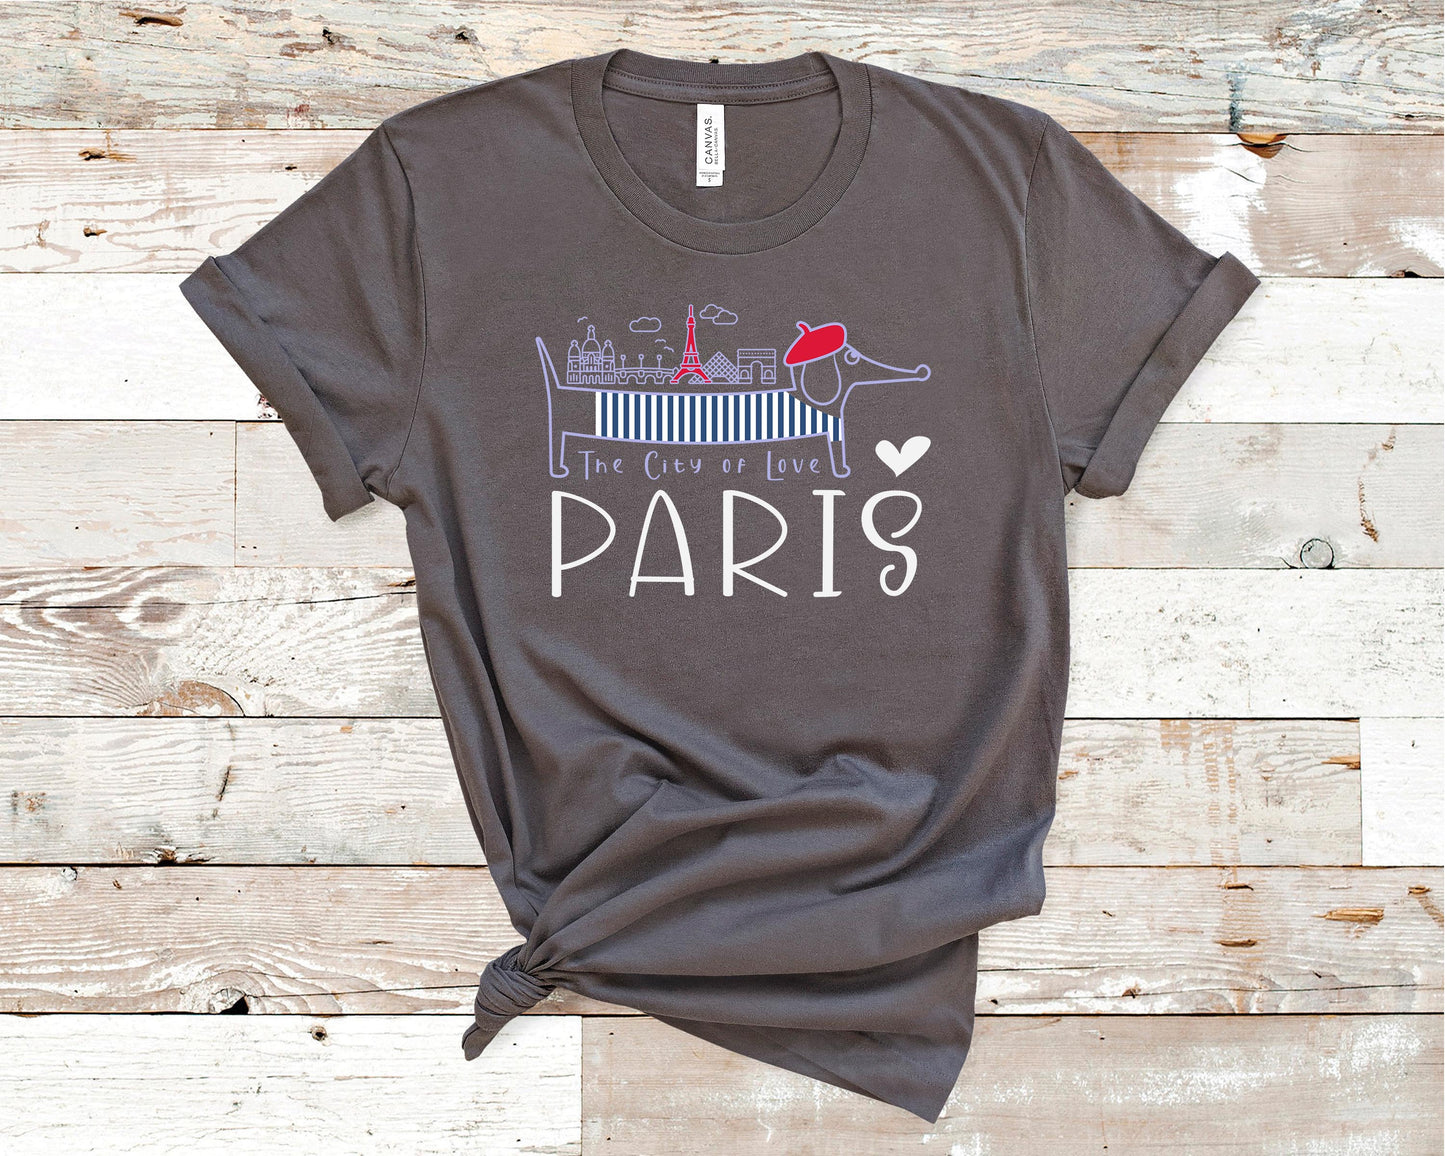 The City of Love Paris - Travel/Vacation